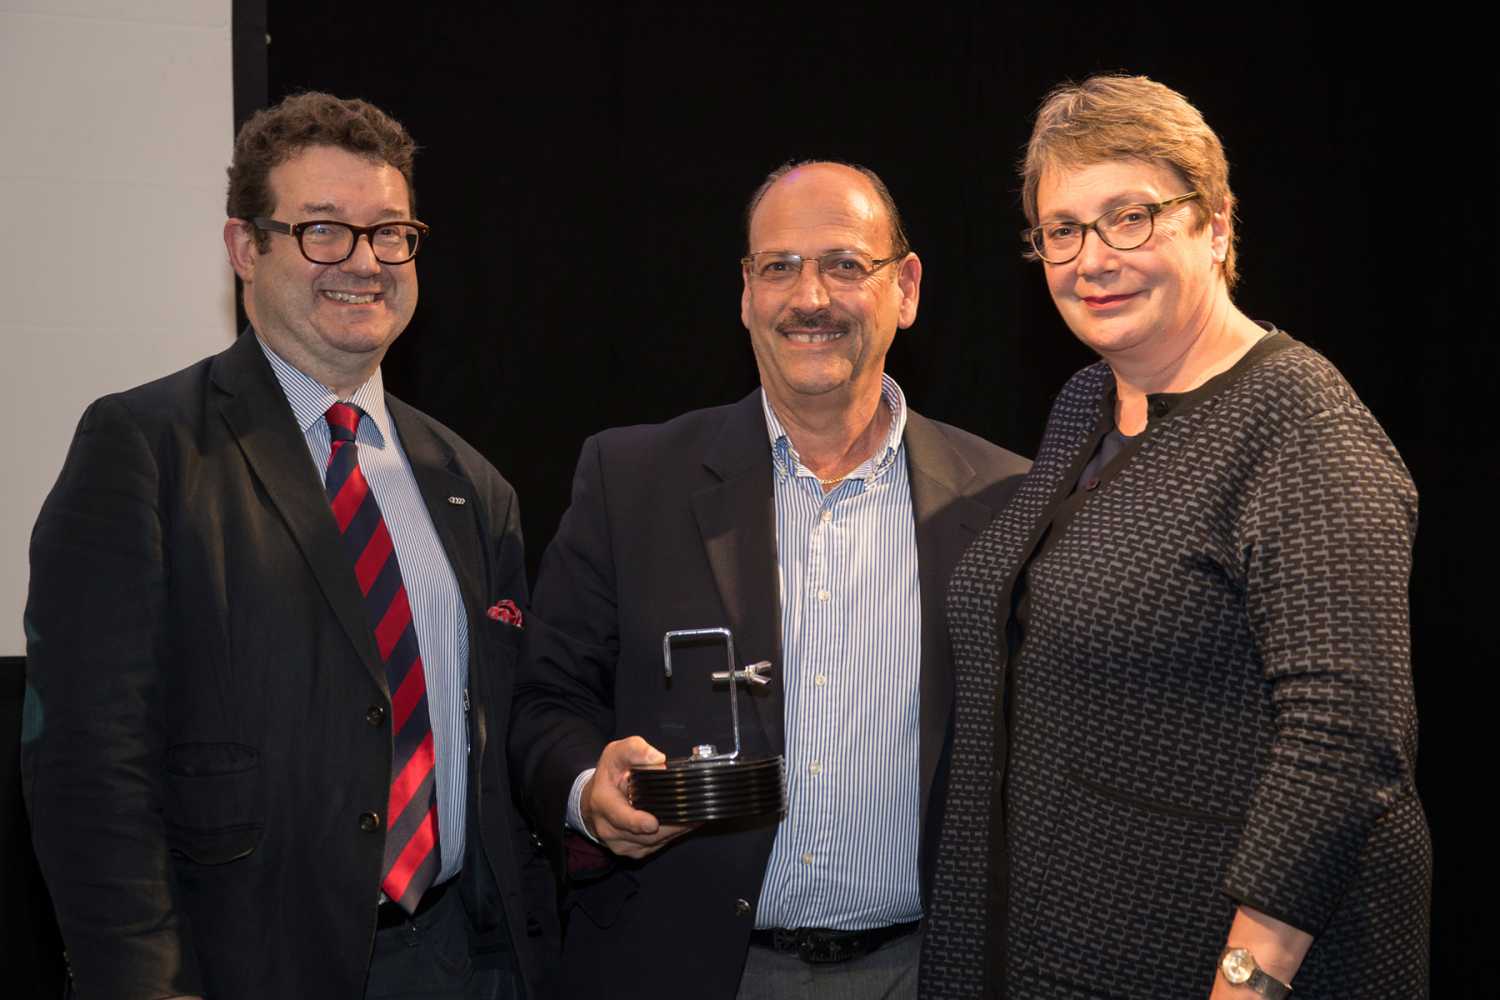 Robin Townley, CEO ABTT, with Gary Vilardi, vice president of sales, City Theatrical, receiving the ABTT Lighting Product of the Year 2017 Award, with ABTT chairwoman Louise Jeffreys